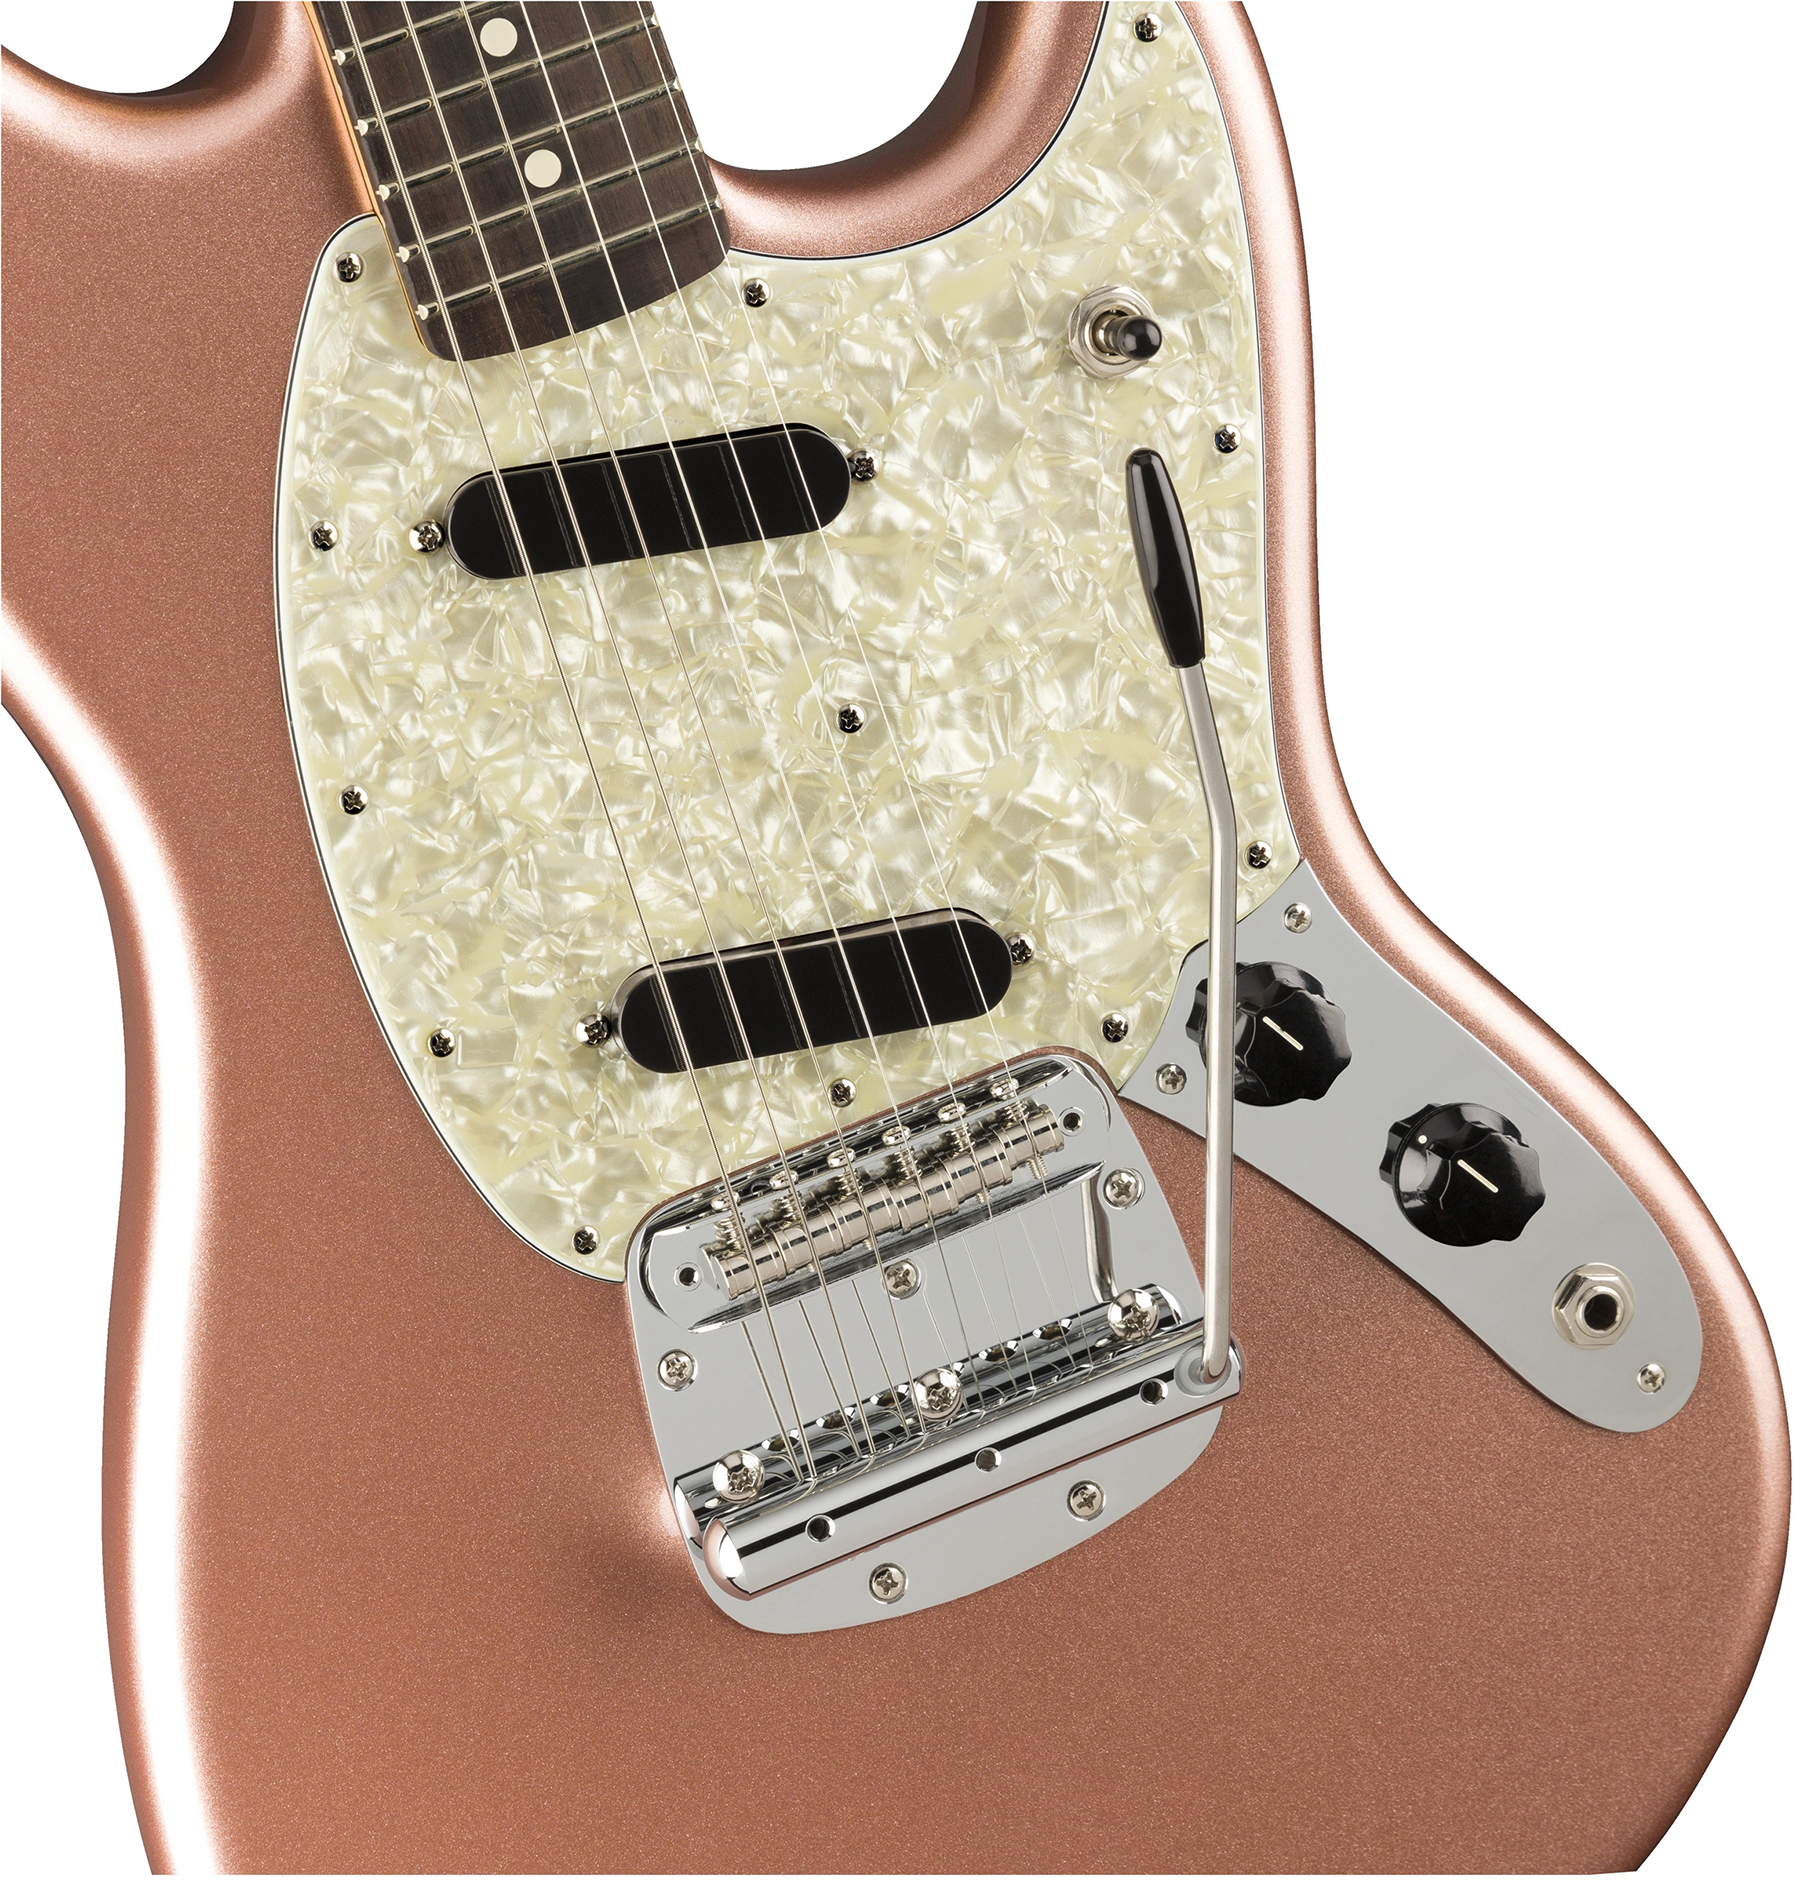 Fender Mustang American Performer Usa Ss Rw - Penny - Double Cut E-Gitarre - Variation 2